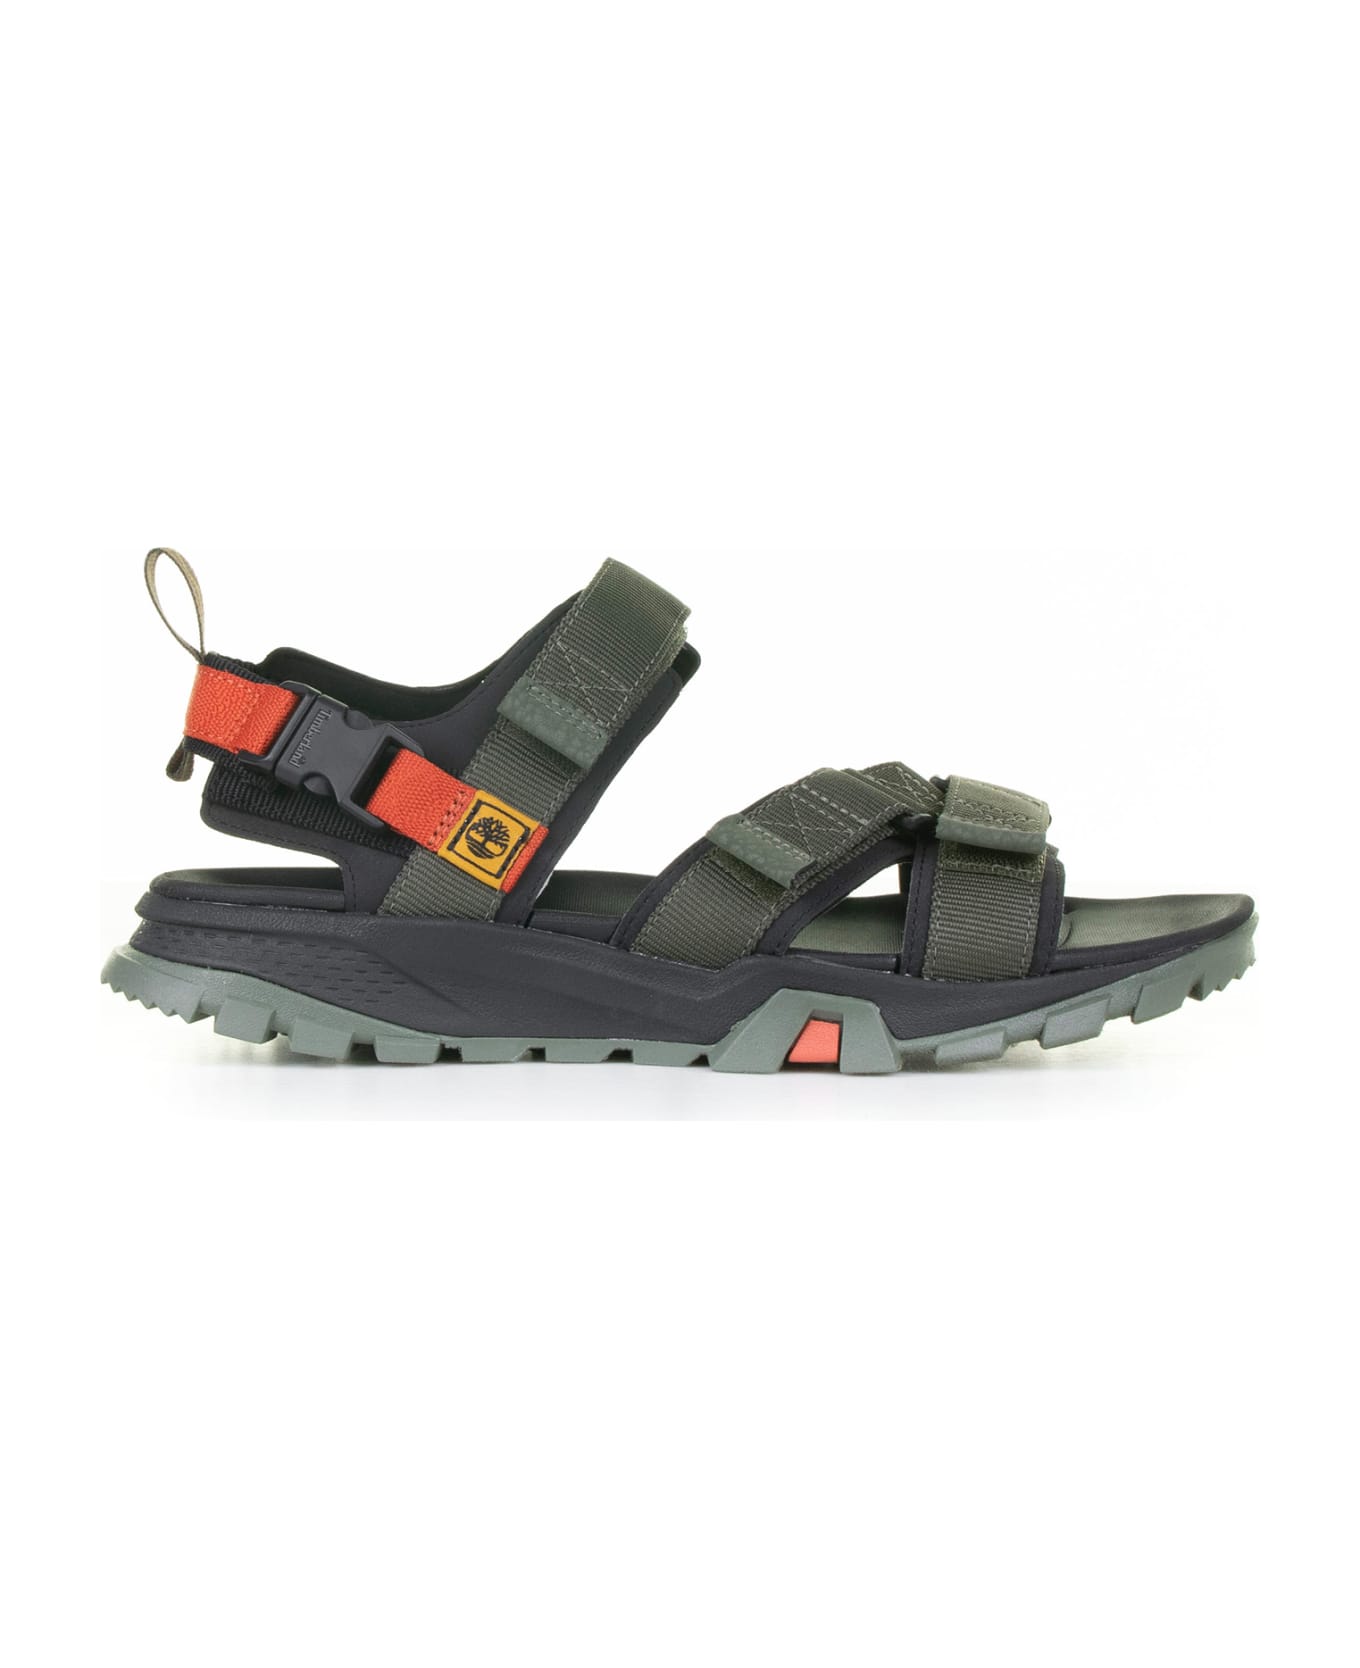 Timberland Sandals With Adjustable Velcro Straps - LEAF GREEN その他各種シューズ